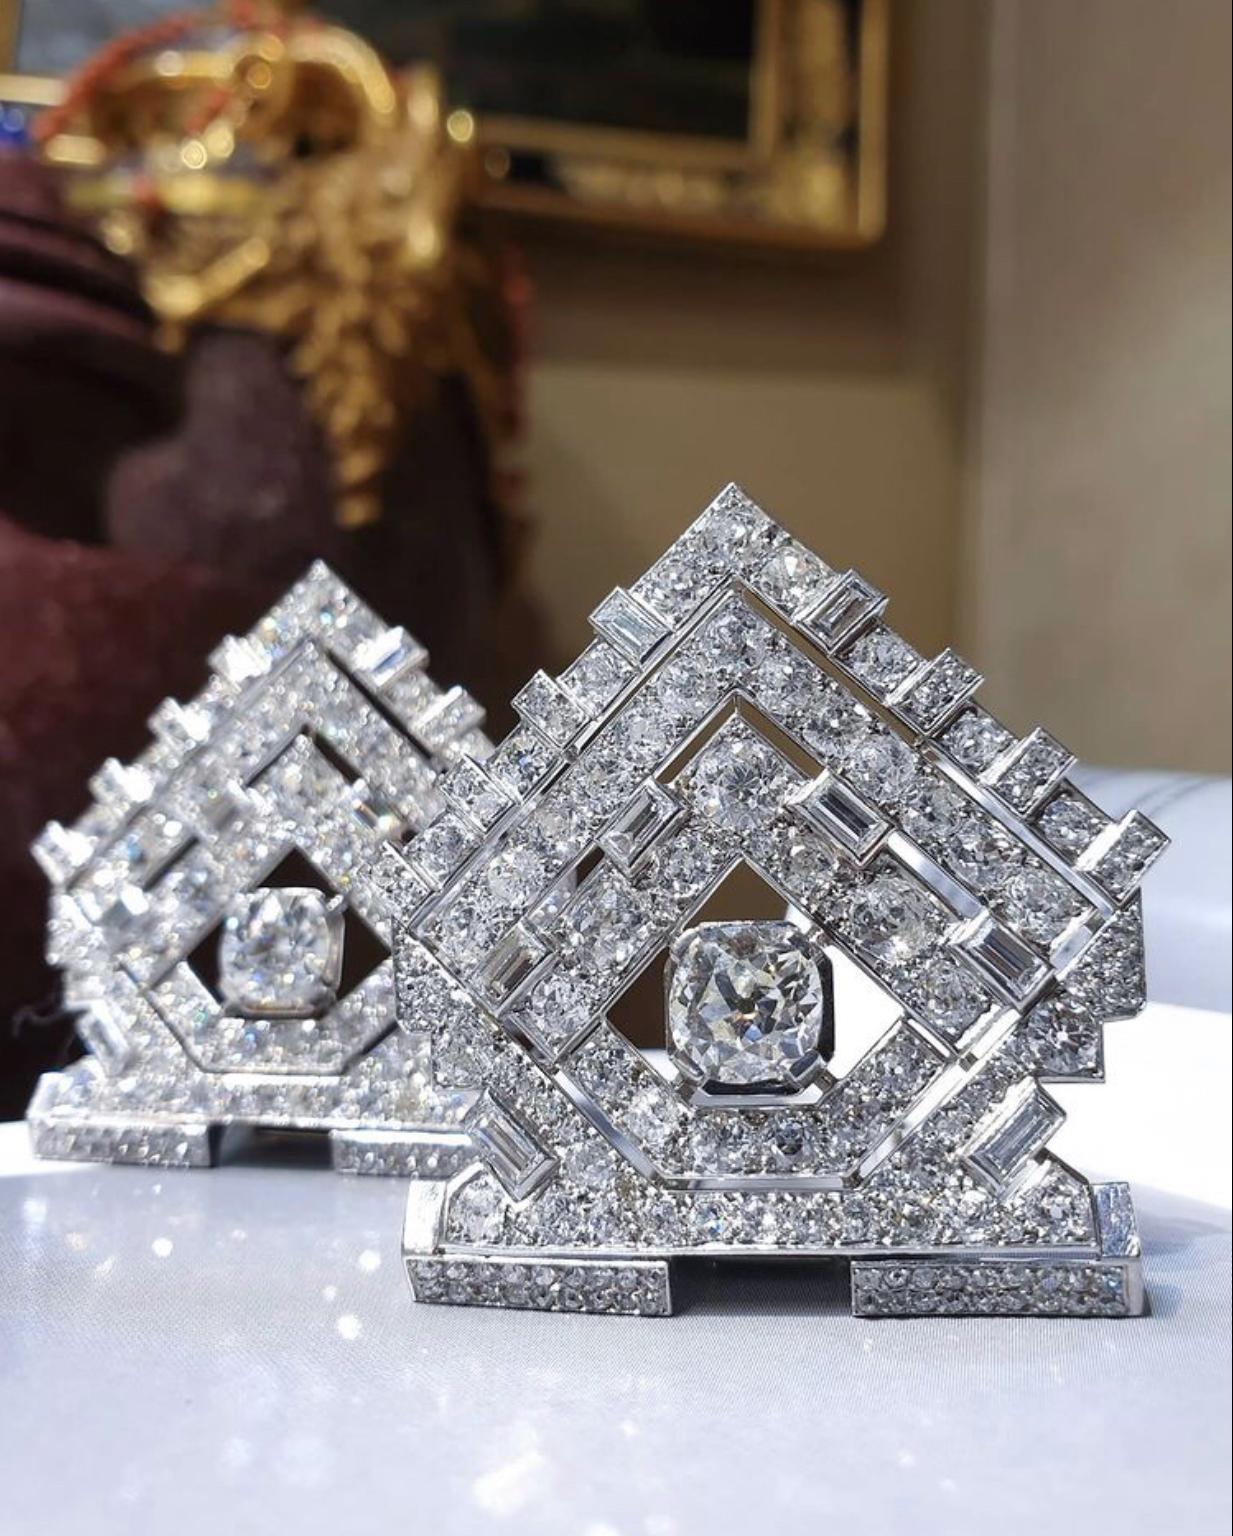 An exceptional Art Deco diamond and platinum brooch that transforms into a pair of dress clips. Totaling approximately 25 carats of diamonds, with the 2 main stones approximately 1.8 carats each. The design is in the style of Cartier. Made in